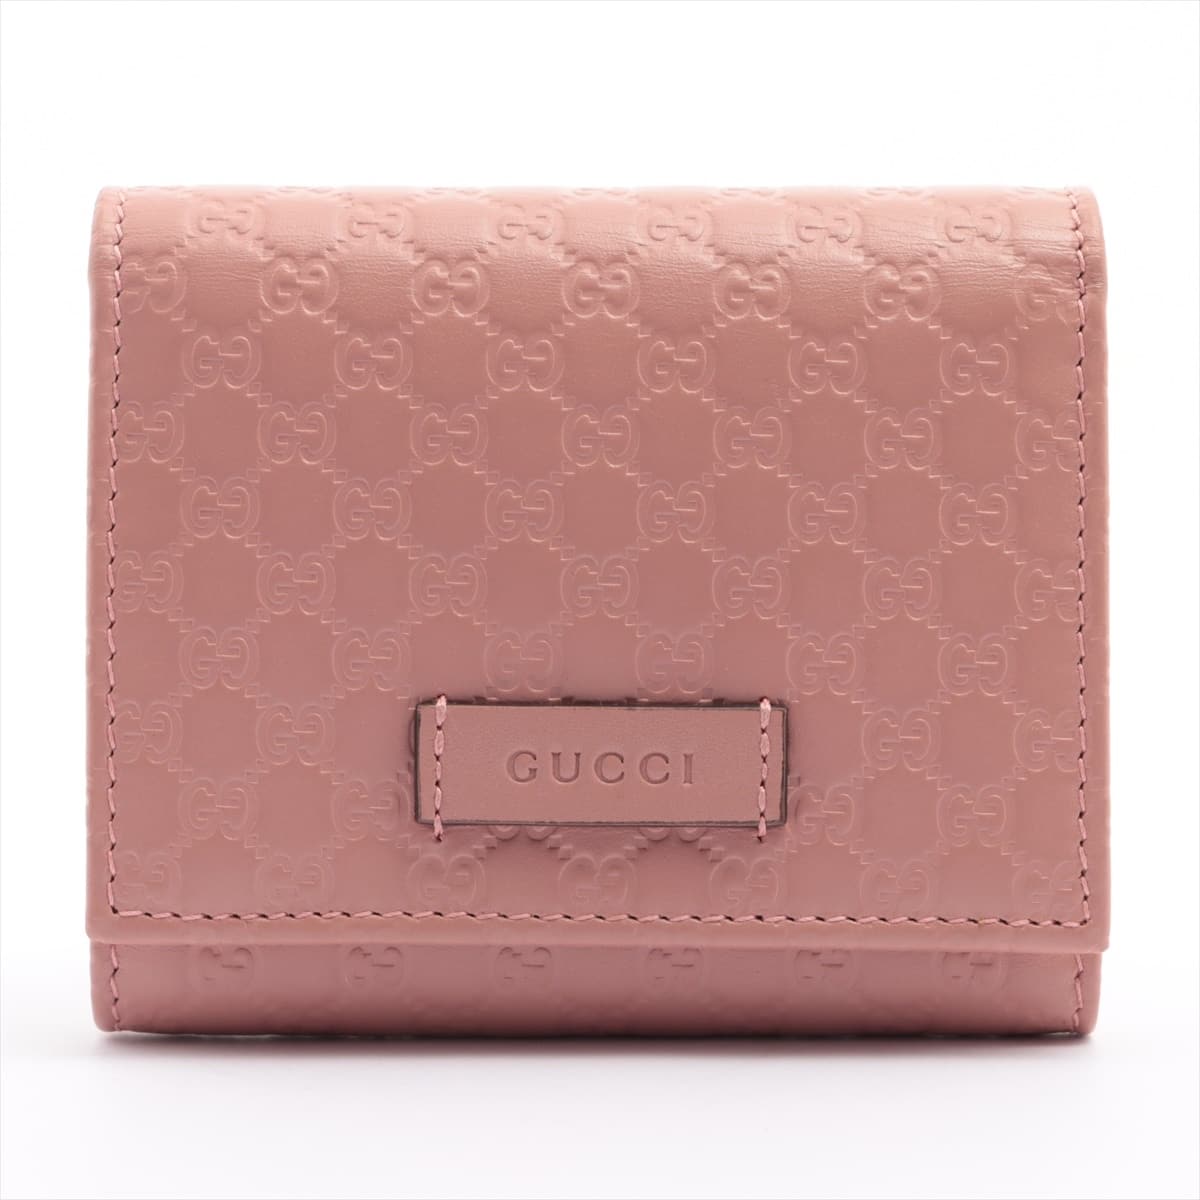 Gucci Micro Gucci 510317 Leather Compact Wallet Pink